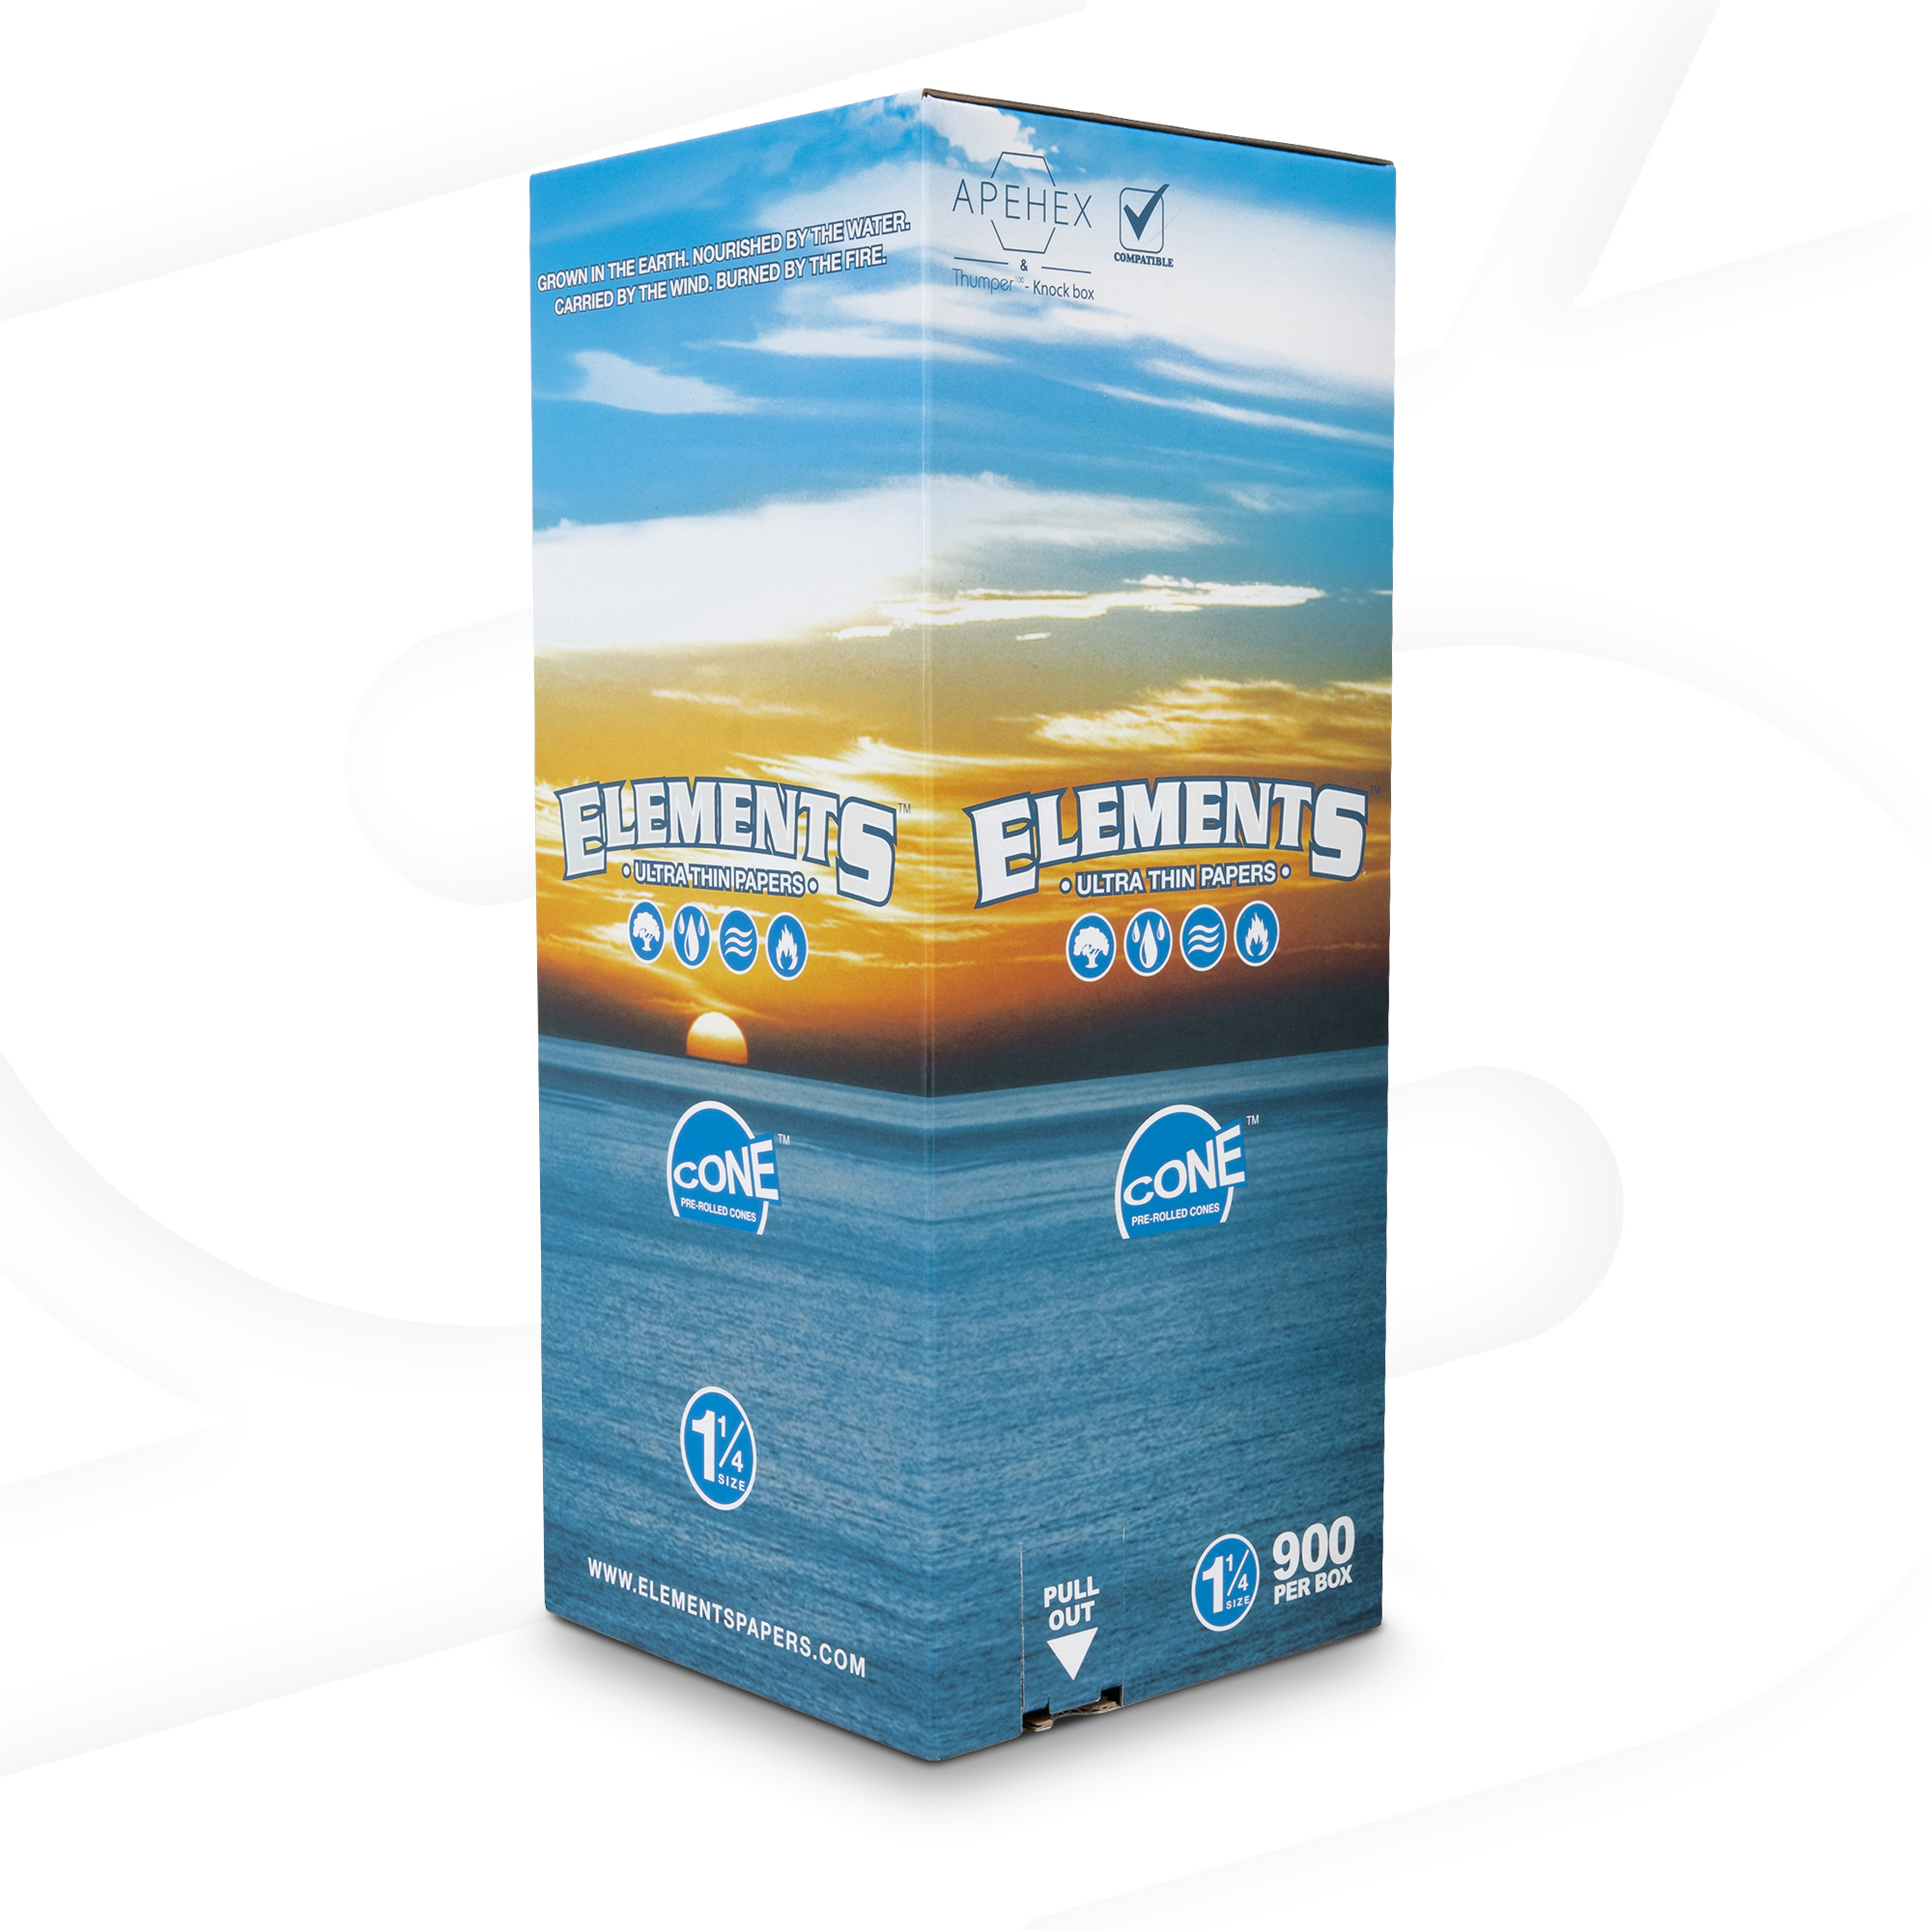 Elements 1 1/4 Pre-Rolled Cones (900 Pack) RAW Cones ELET-CNRC-1401 esd-official